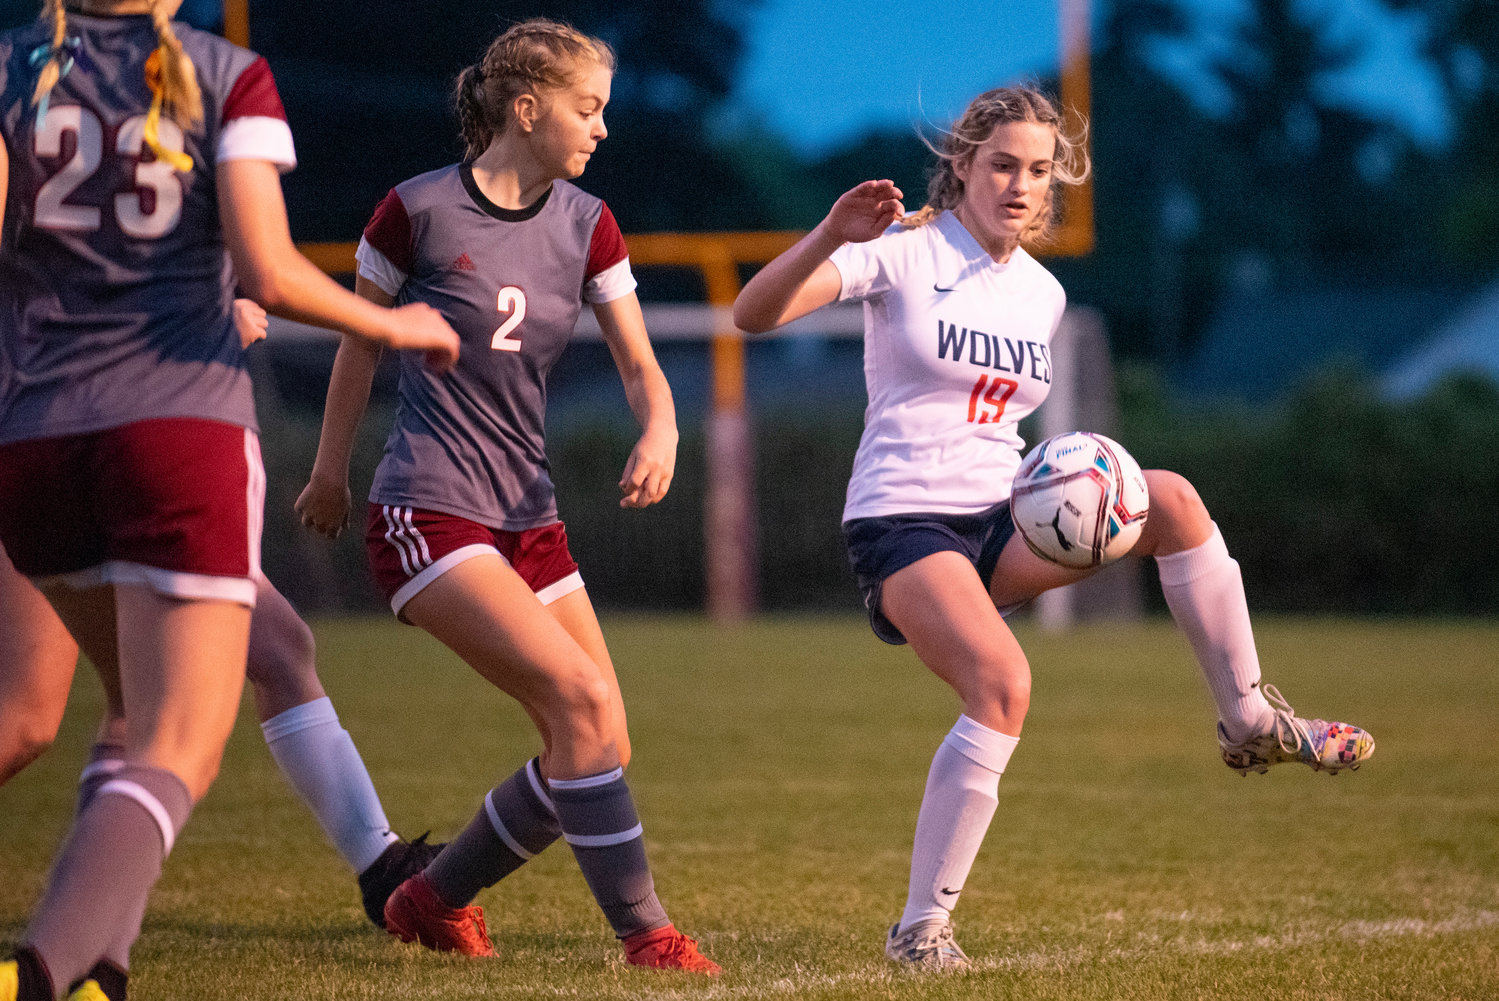 Black Hills' Mackie Finney (19) boots a pass pass W.F. West's Maddy Casper (2) on Tuesday.